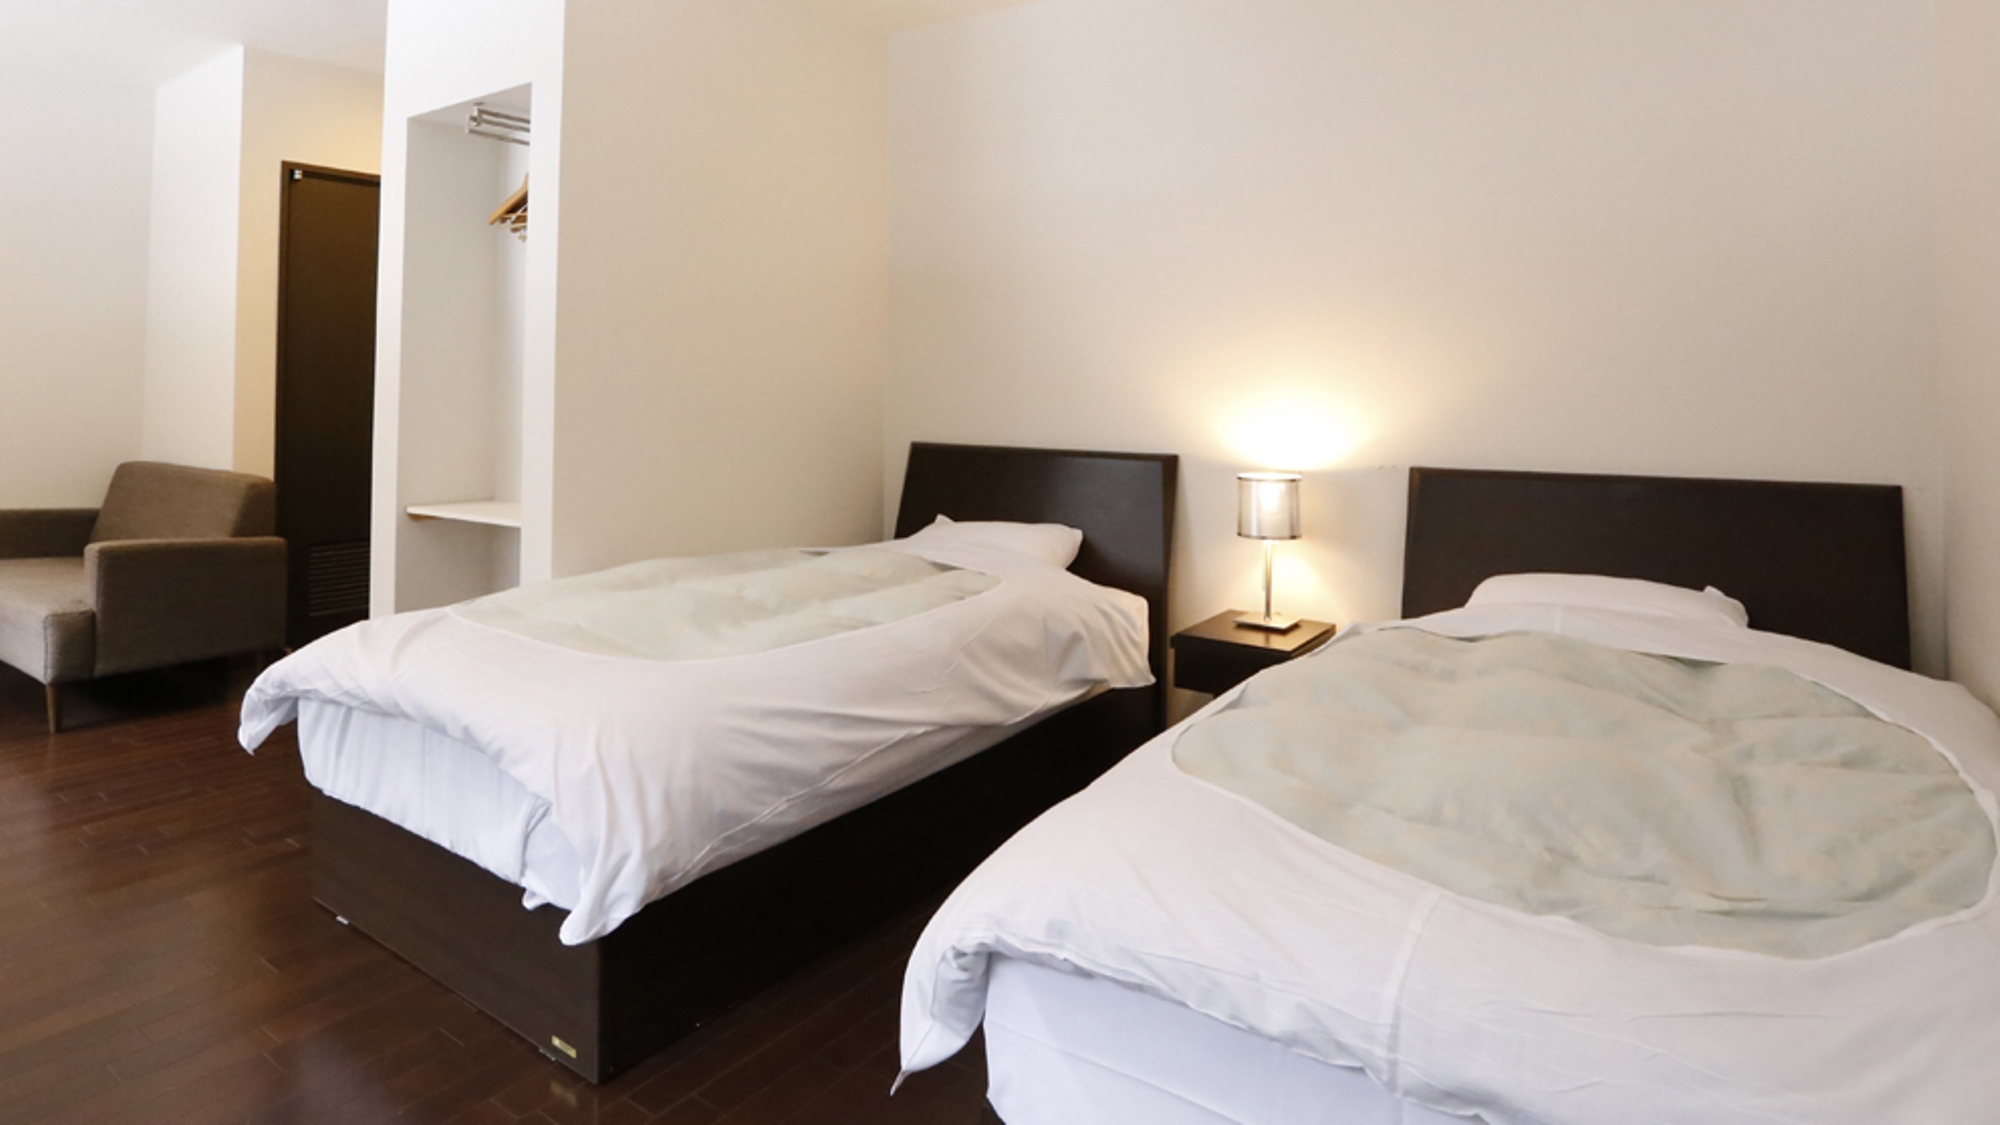 Mimata Onsen Kanagikanko Hotel Mimata Onsen Kanagikanko Hotel is conveniently located in the popular Hamada area. The property offers guests a range of services and amenities designed to provide comfort and convenience. Take advant